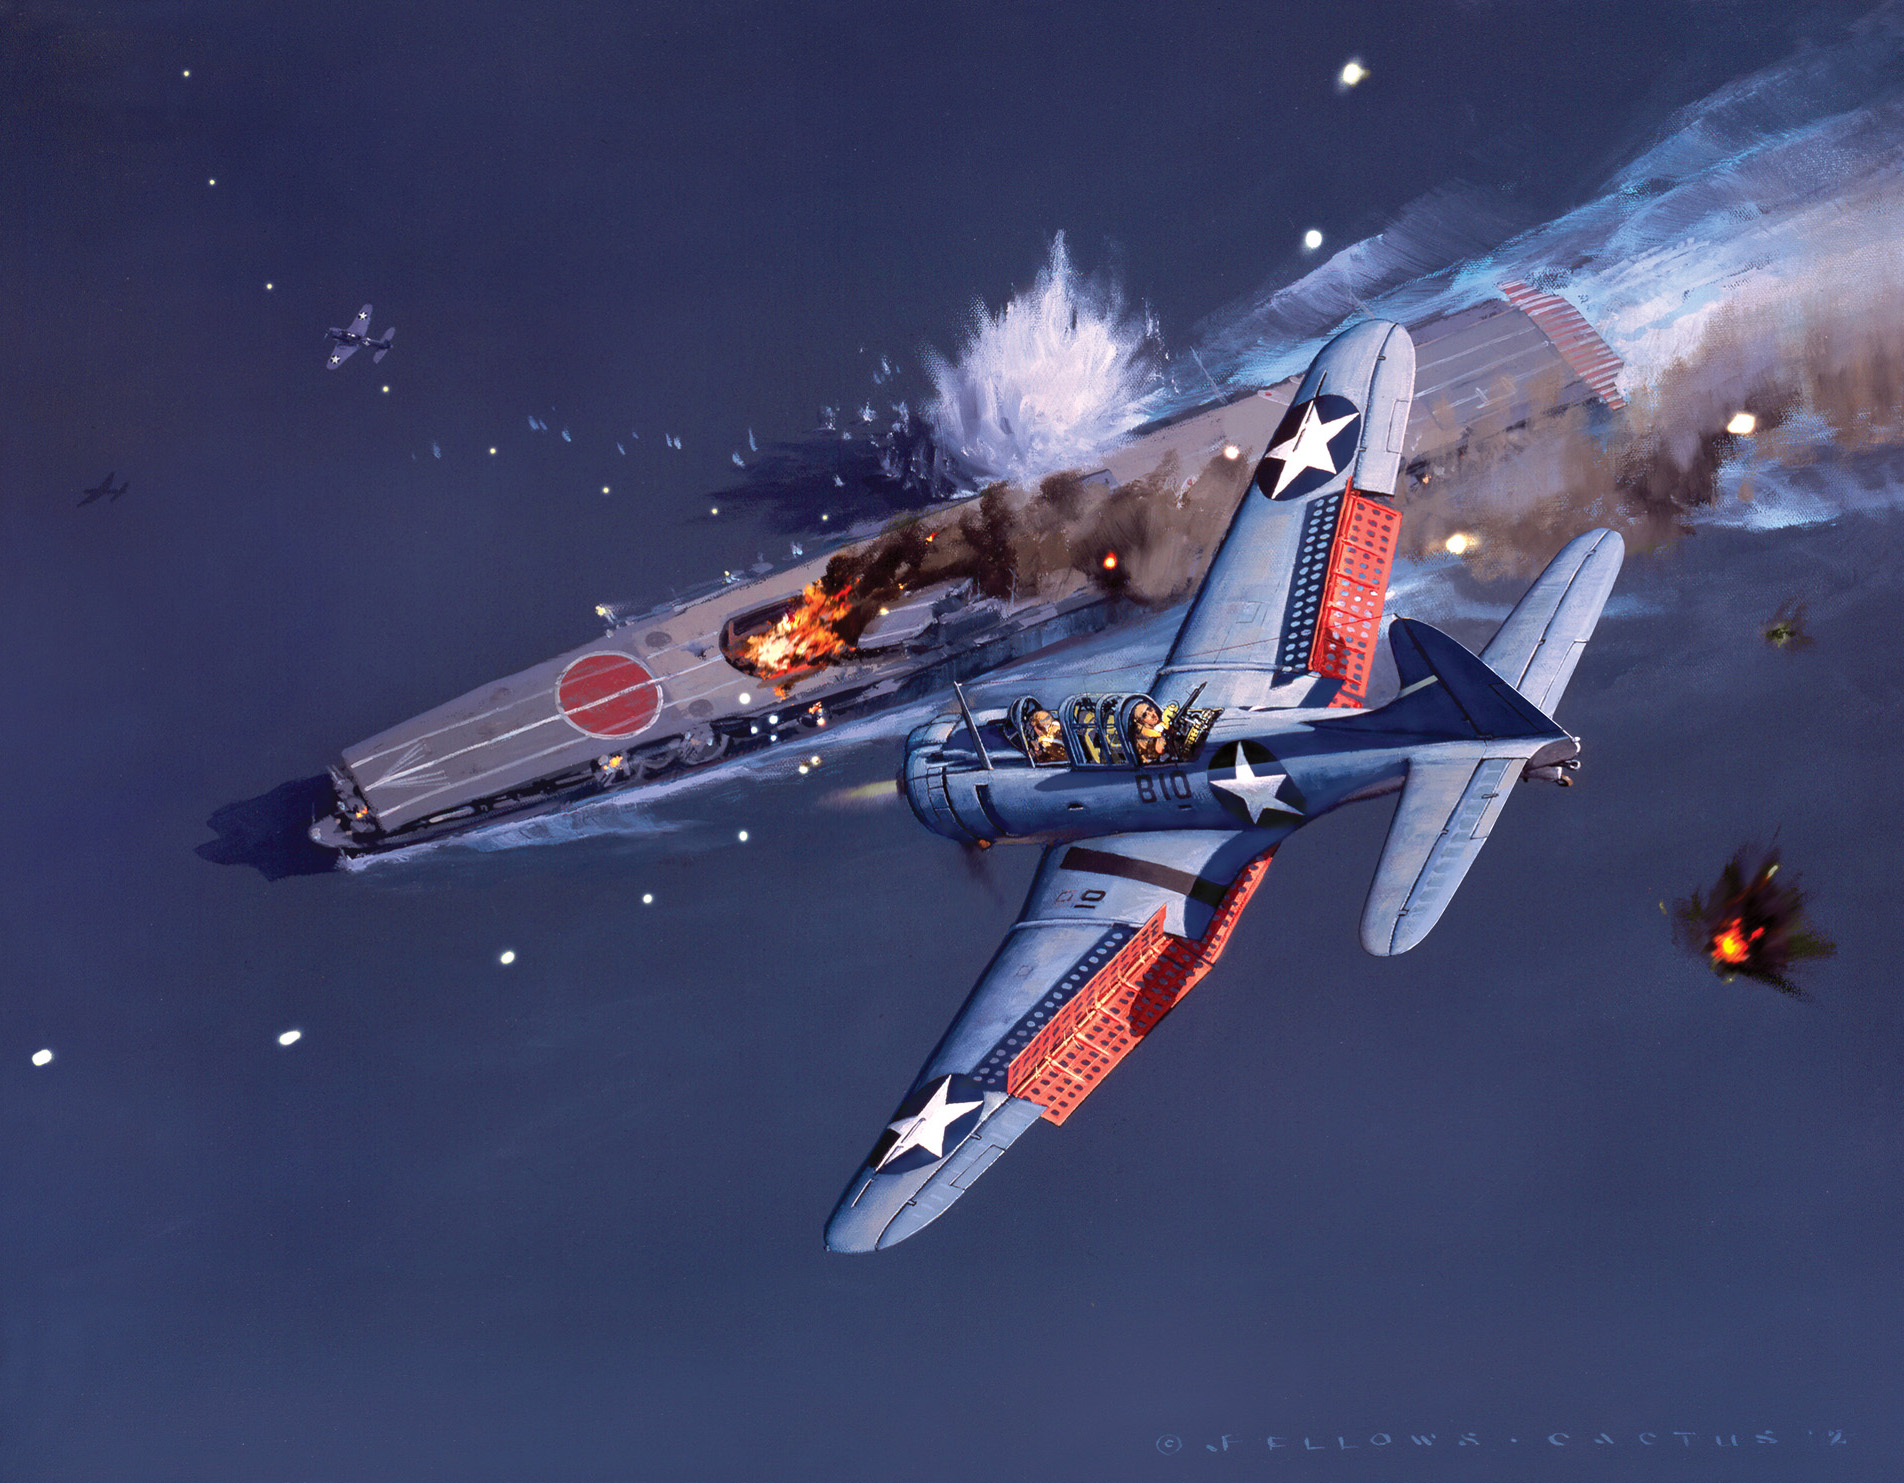 In this painting by artist Jack Fellows, U.S. Navy Lieutenant “Syd” Bottomley pilots his Douglas SBD-3 Dauntless dive bomber in a steep descent, dive brakes extended on the trailing edges of the plane’s wings, during a bombing run against the Japanese aircraft carrier Kaga, the largest of four carriers the Imperial Japanese Navy deployed during the Battle of Midway. Bottomley scored a direct hit during the pivotal action of June 4, 1942, but found his own carrier, USS Yorktown, damaged upon his return.